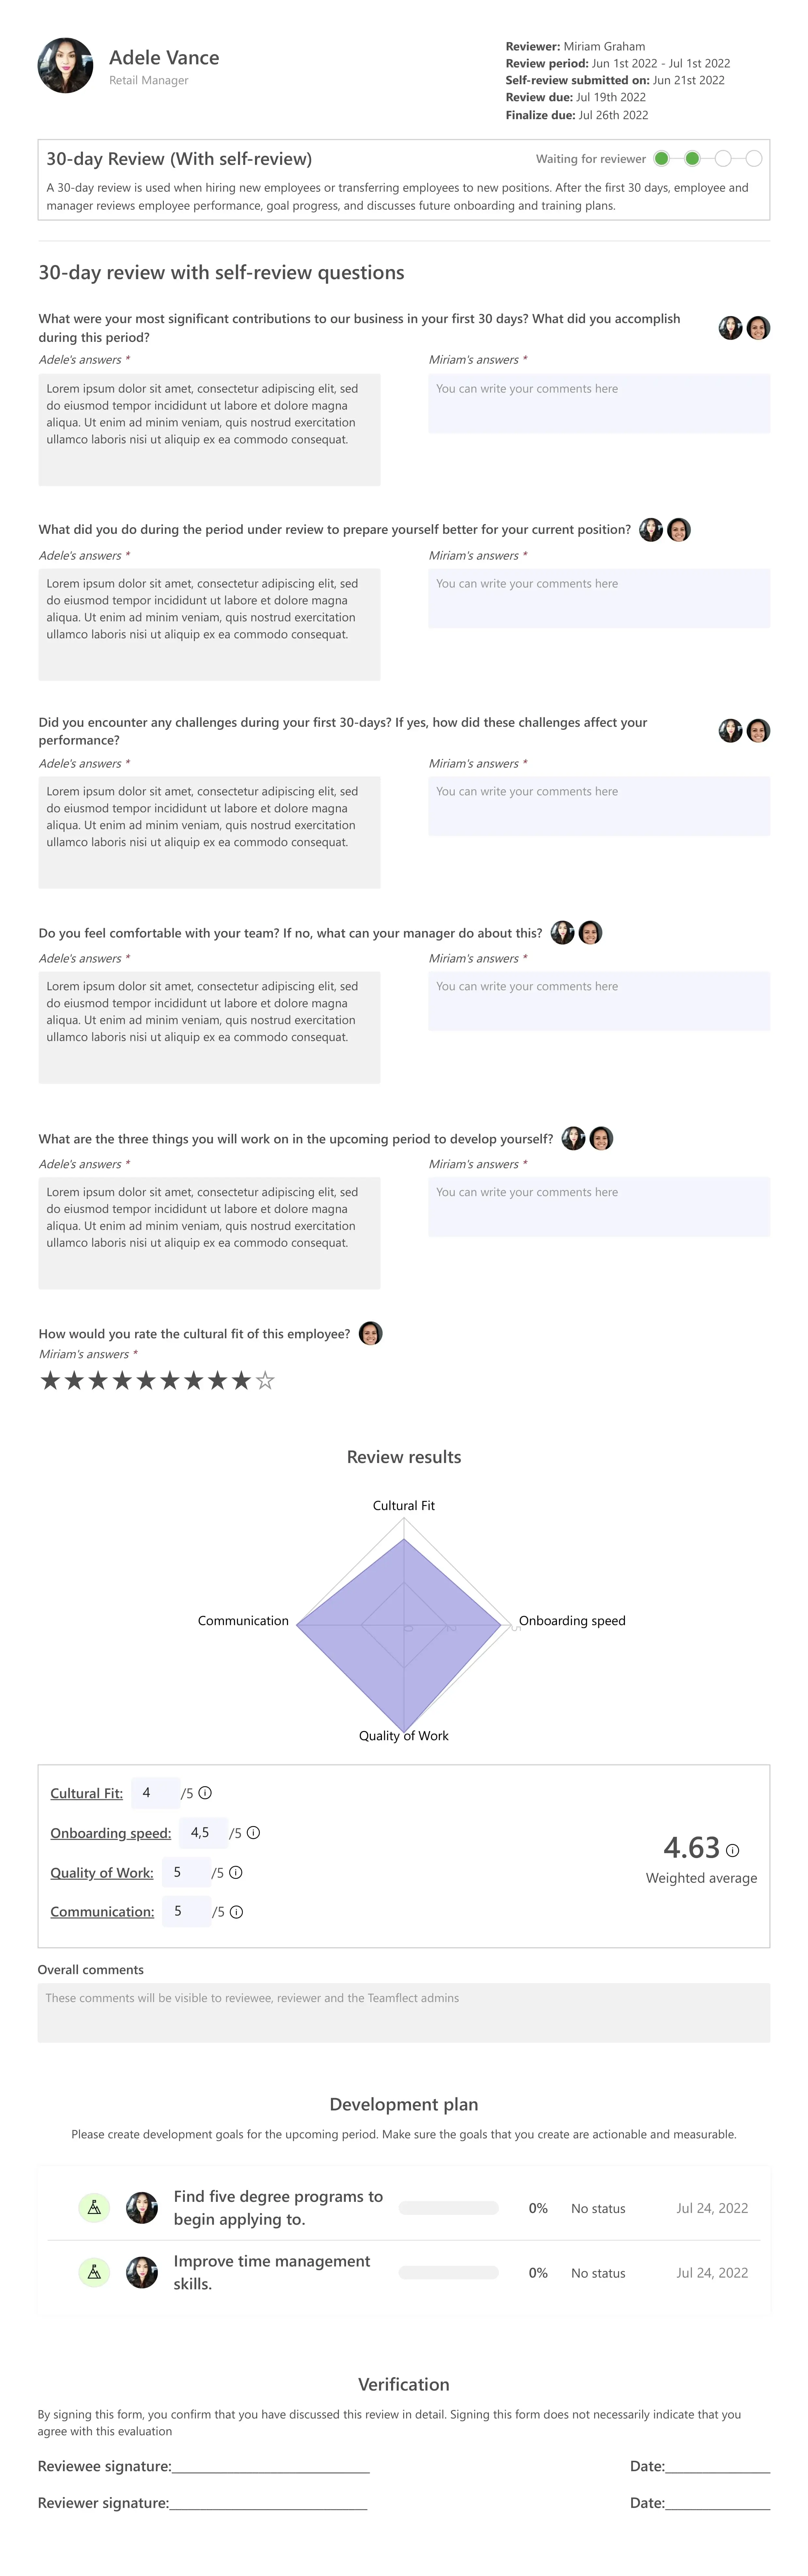 Teamflect 30-day review with self-review template in Microsoft Teams